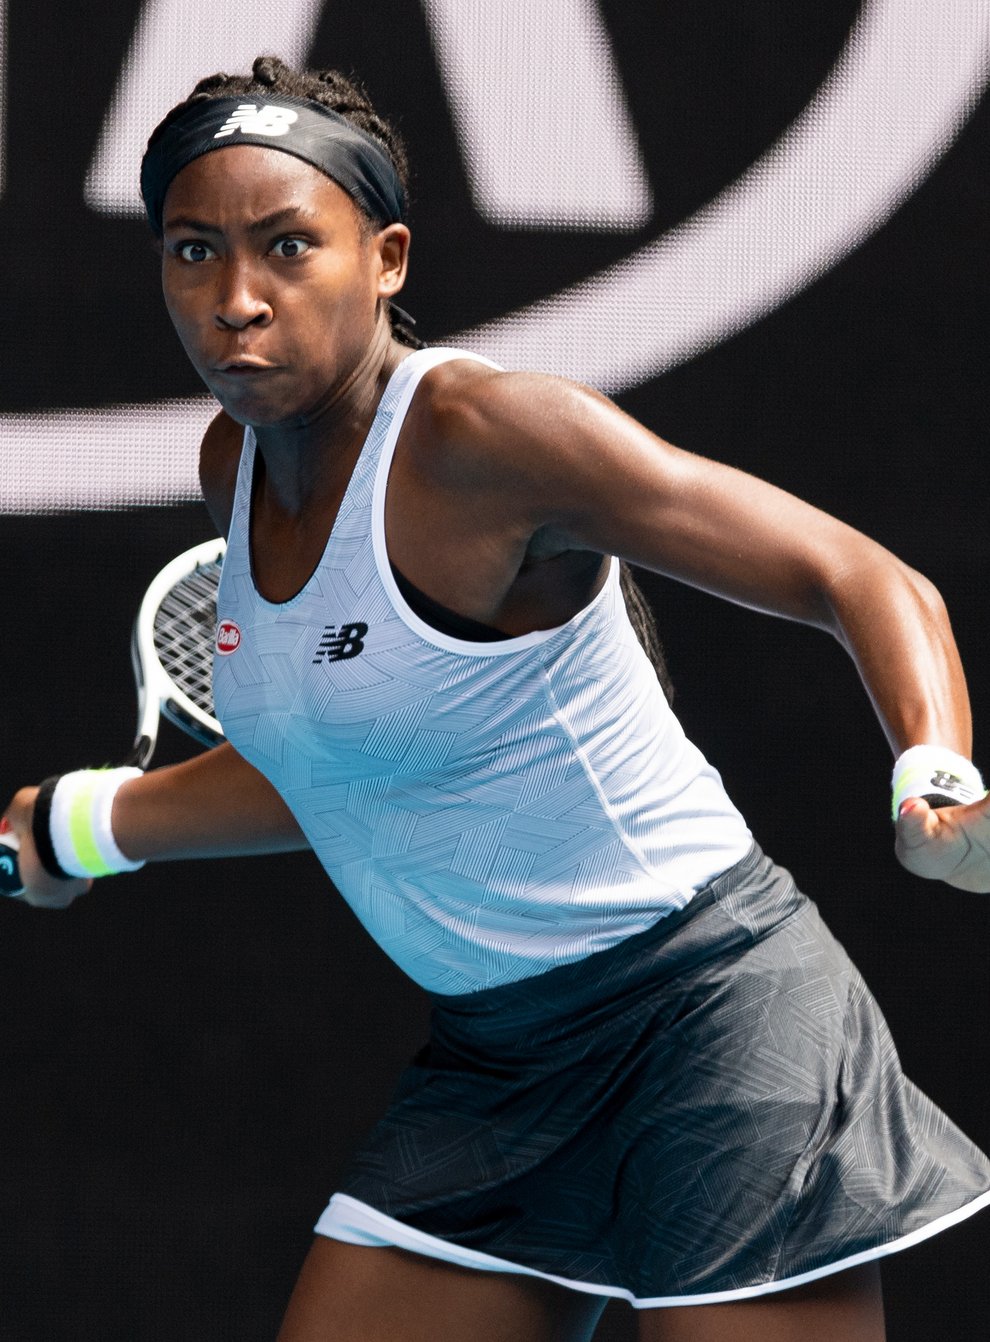 Coco Gauff impressed many with her speech on the Black Lives Matter' movement this week